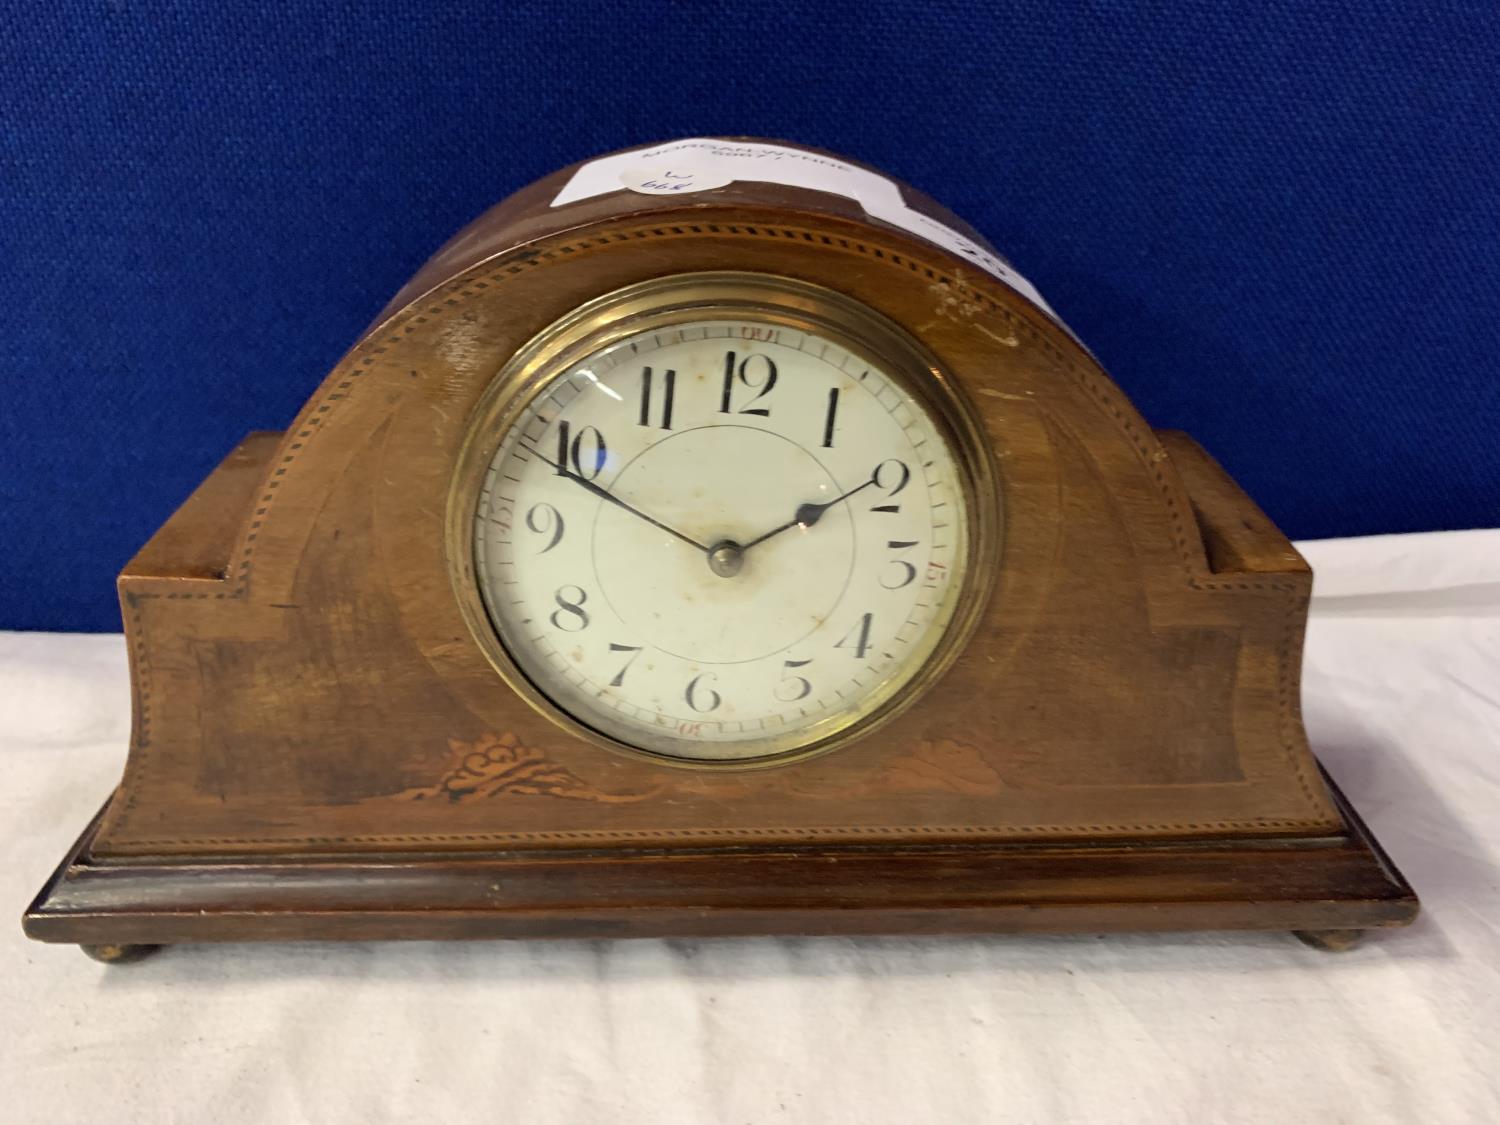 A WOODEN MANTLE CLOCK WITH INLAY DETAIL AND BRASS FACE SURROUND